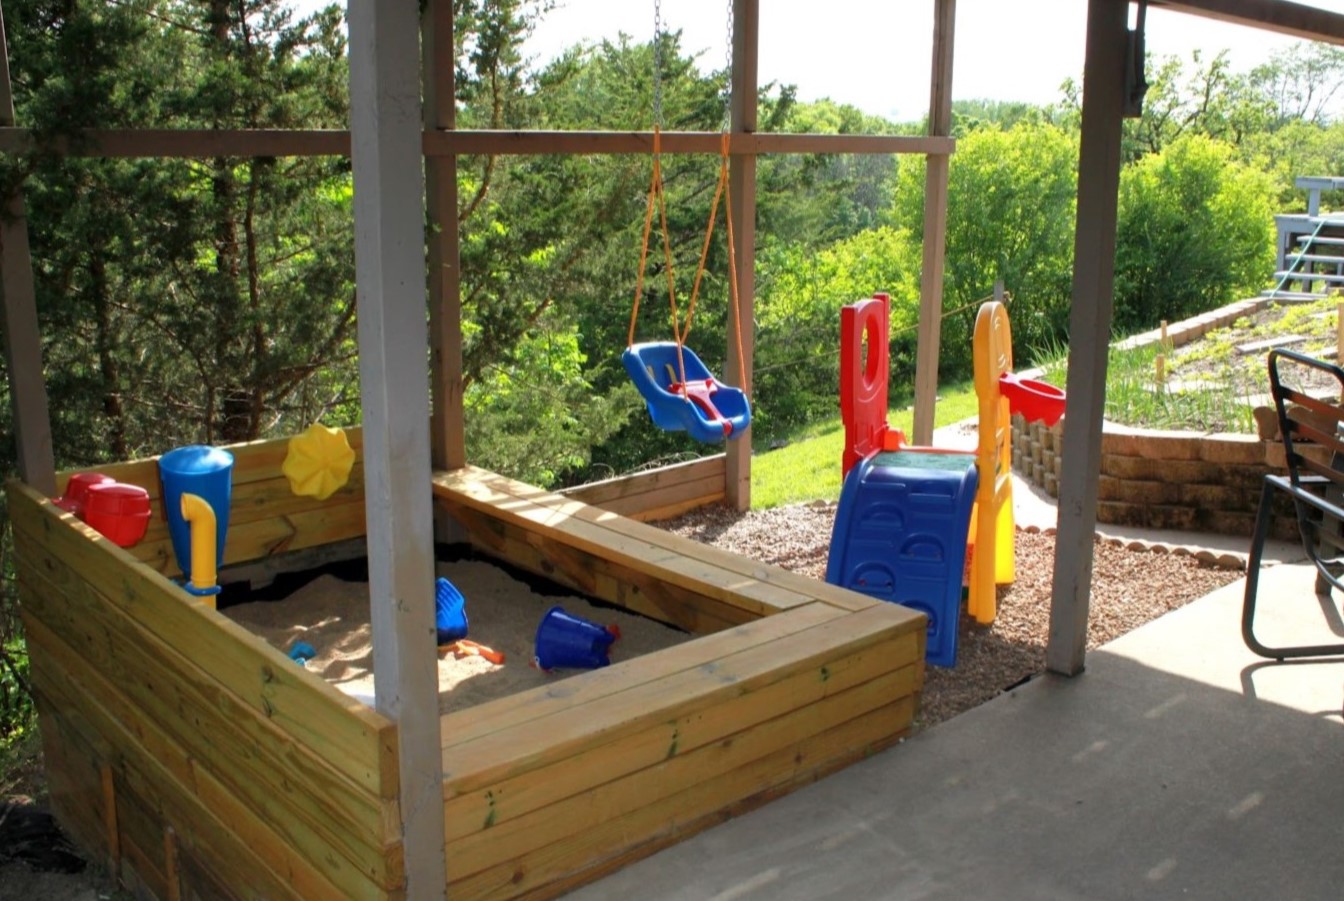 How To Turn Under Deck Into A Play Area